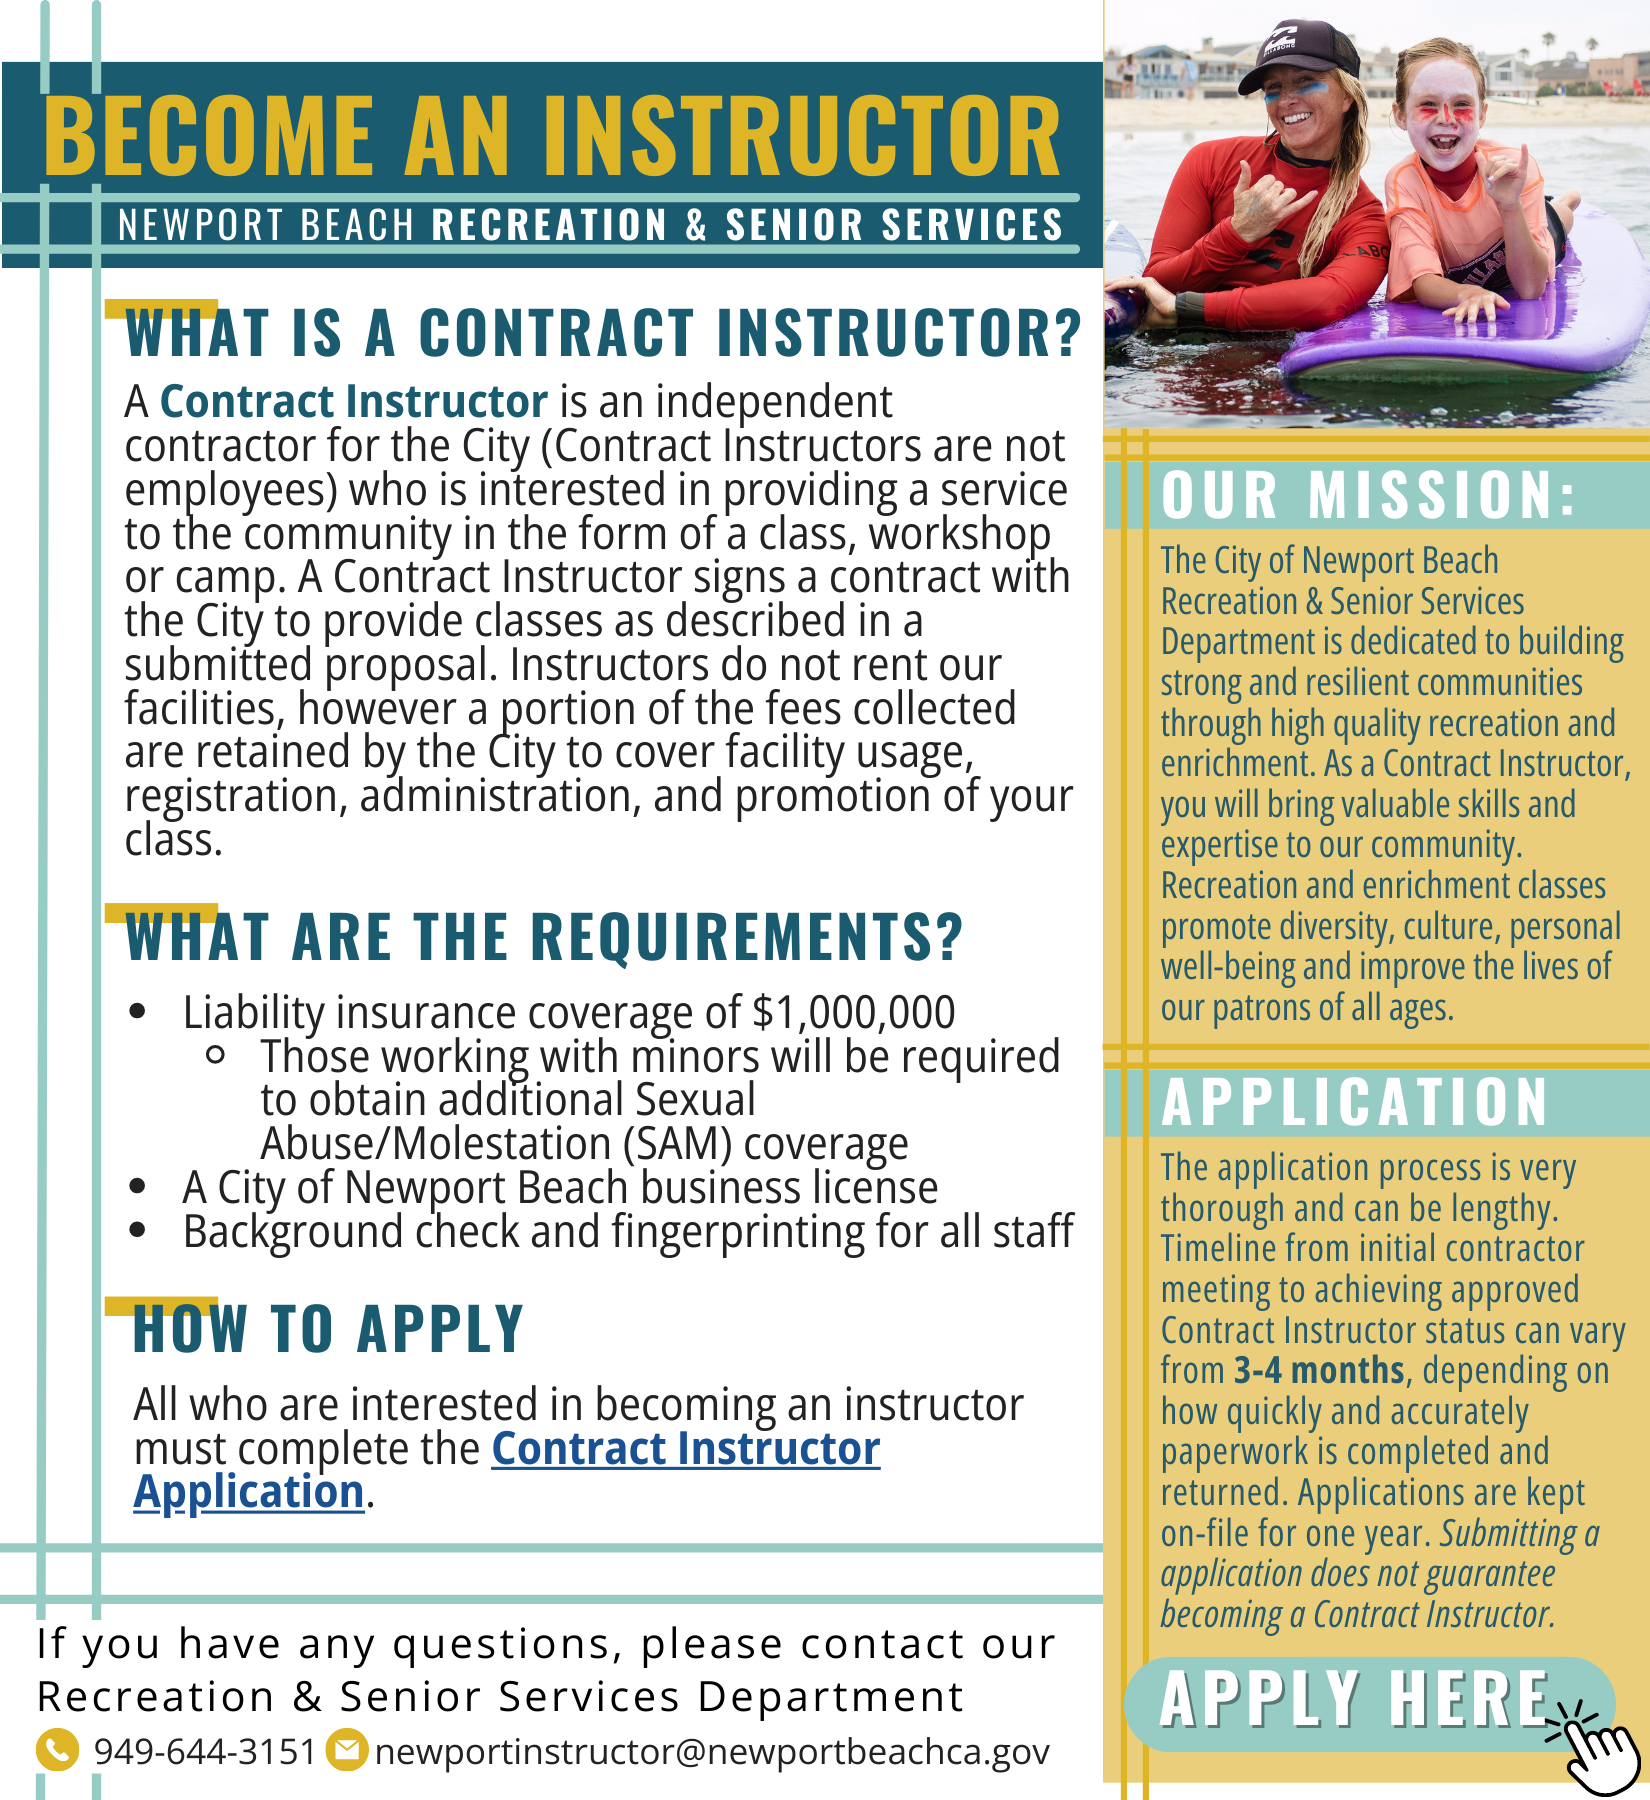 Become an Instructor (info graphic)  (5.5 × 6 in) (2)